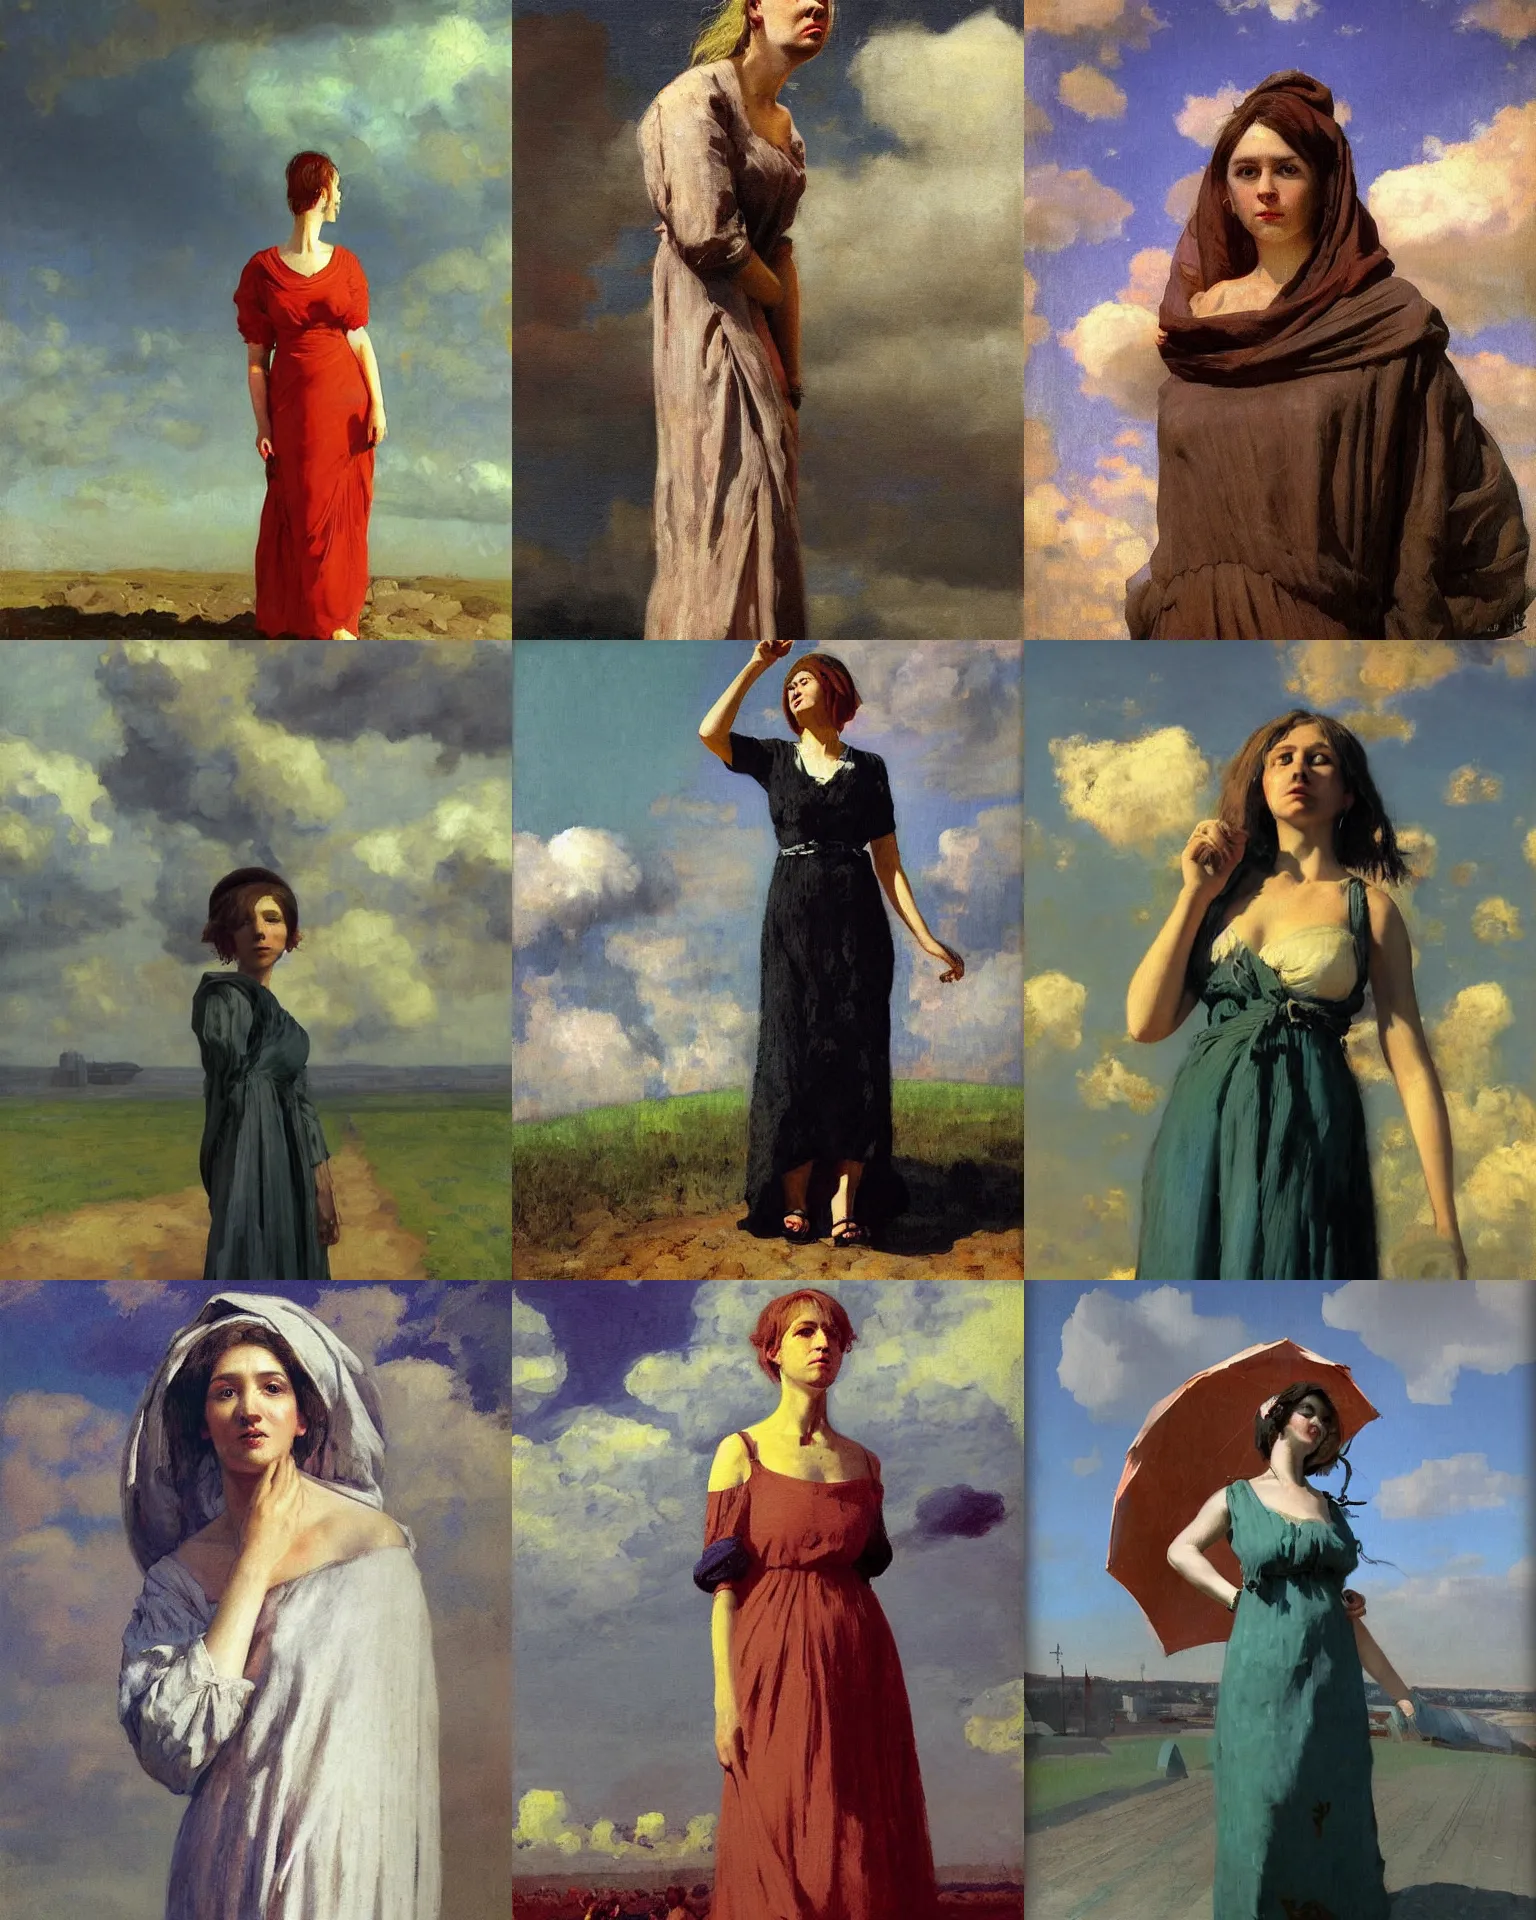 Prompt: woman portrait, female figure in maxi dress, sky, thunder clouds modernism, low poly, industrial, vapor punk, barocco, ilya repin style